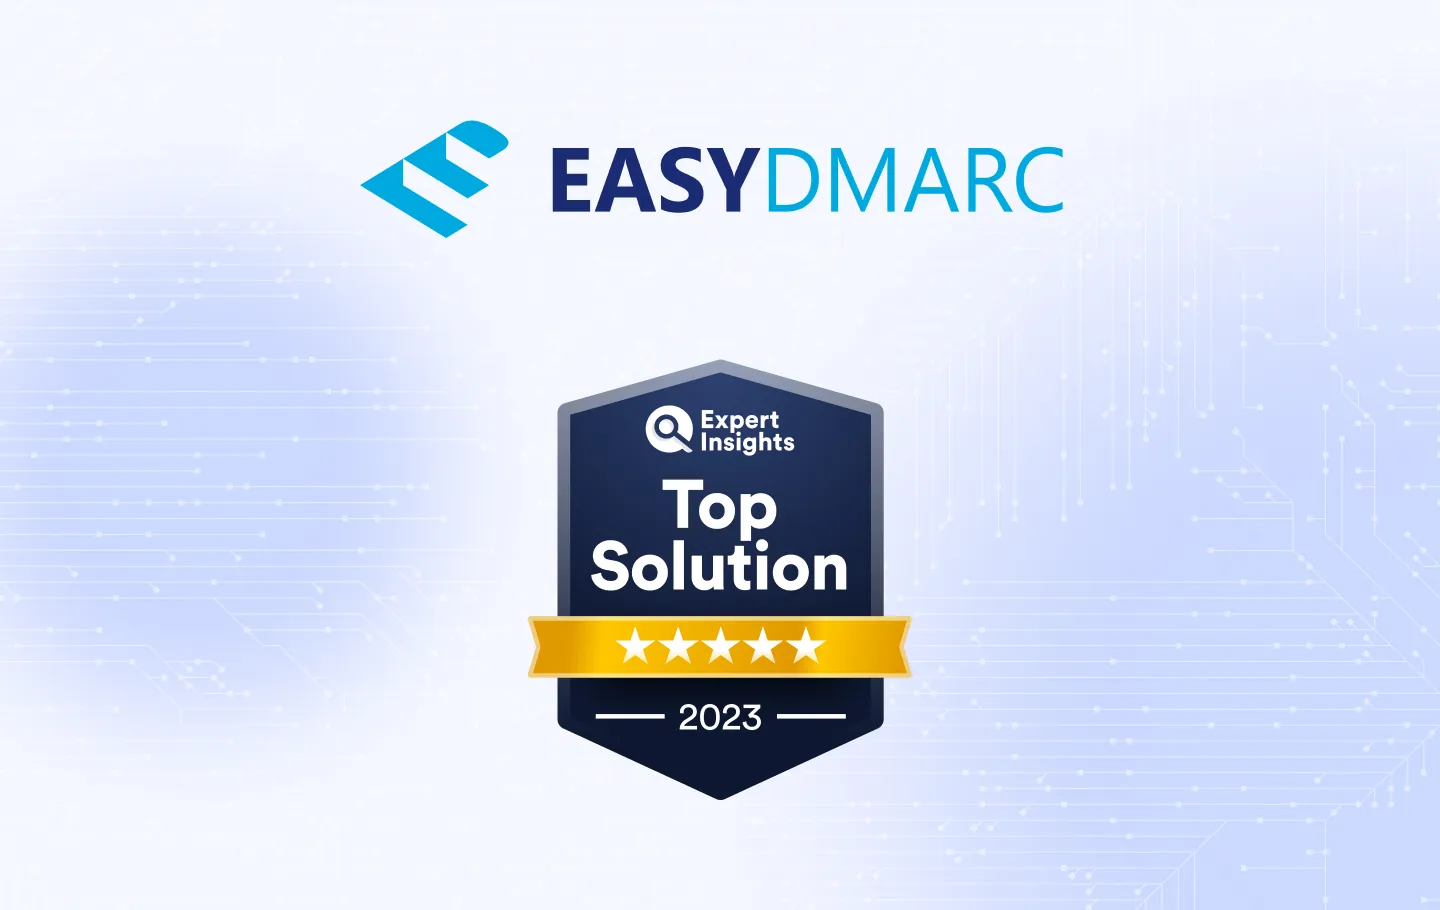 EasyDMARC Recognized As “Top Solution” Summer 2023 by Expert Insights